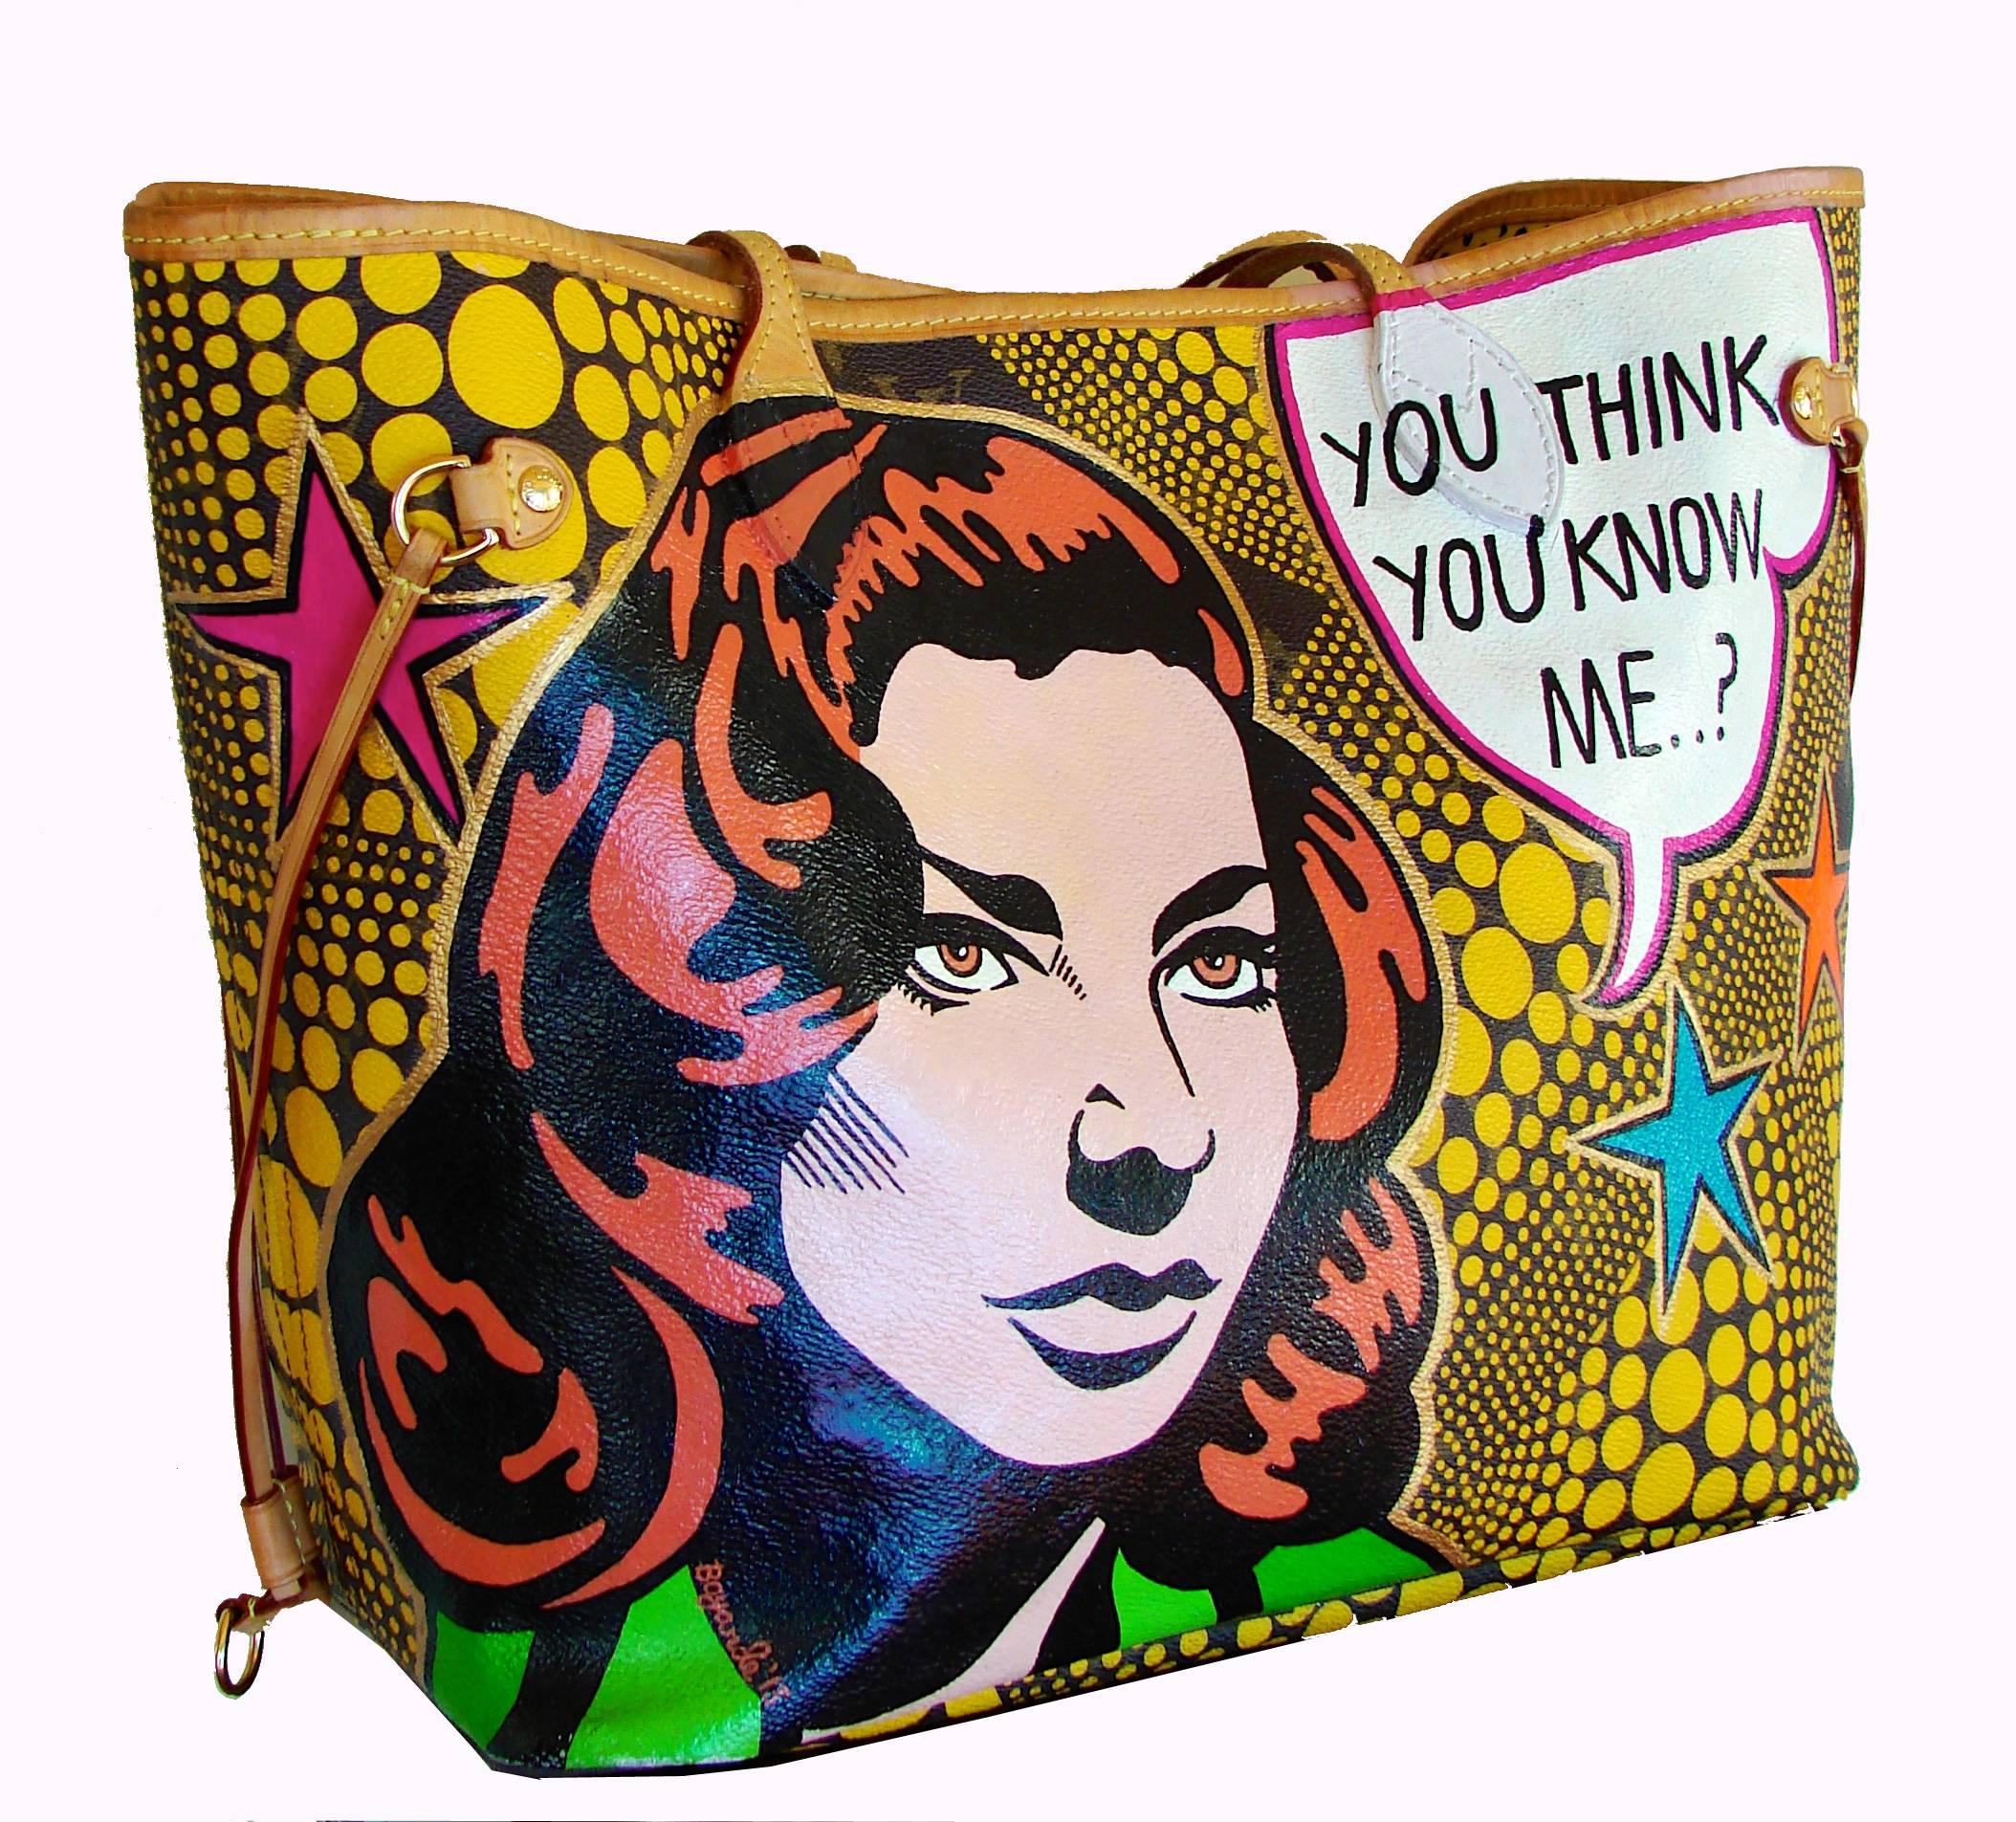 Here's a bag for the fashionista who has everything! This Louis Vuitton Neverfull MM with Yayoi Kusama yellow pumpkin print was customized by the UK artist Boyarde with a colorful pop art graphic.  Boyarde's work has been featured in fashion blogs